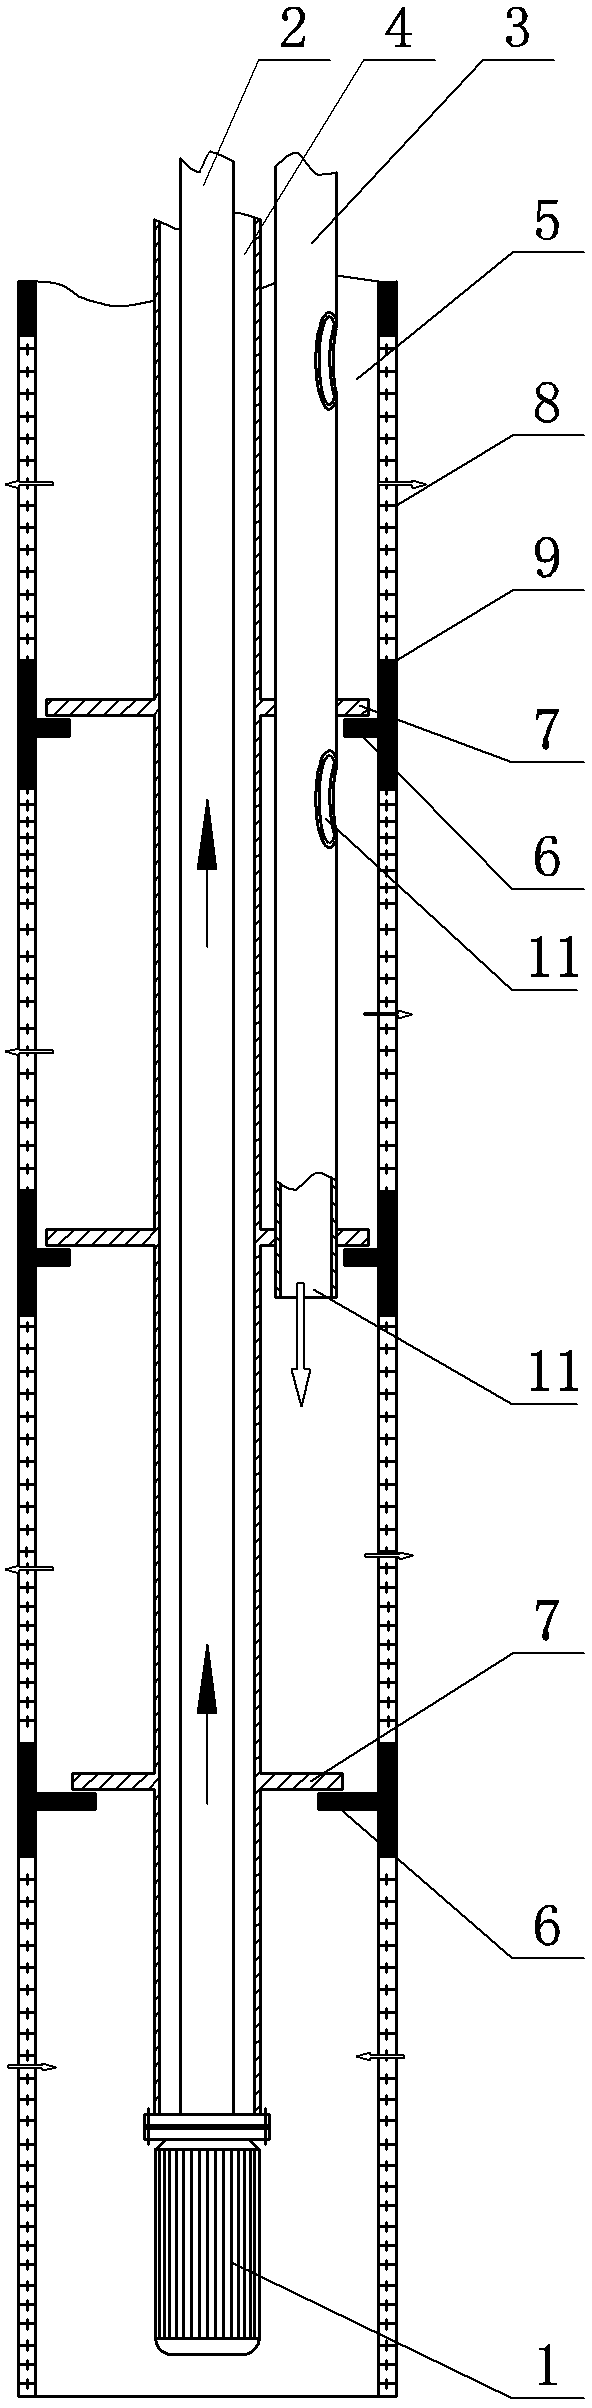 Flat plate type seal structure of water outlet and return device in same well for water source heat pump central air conditioner